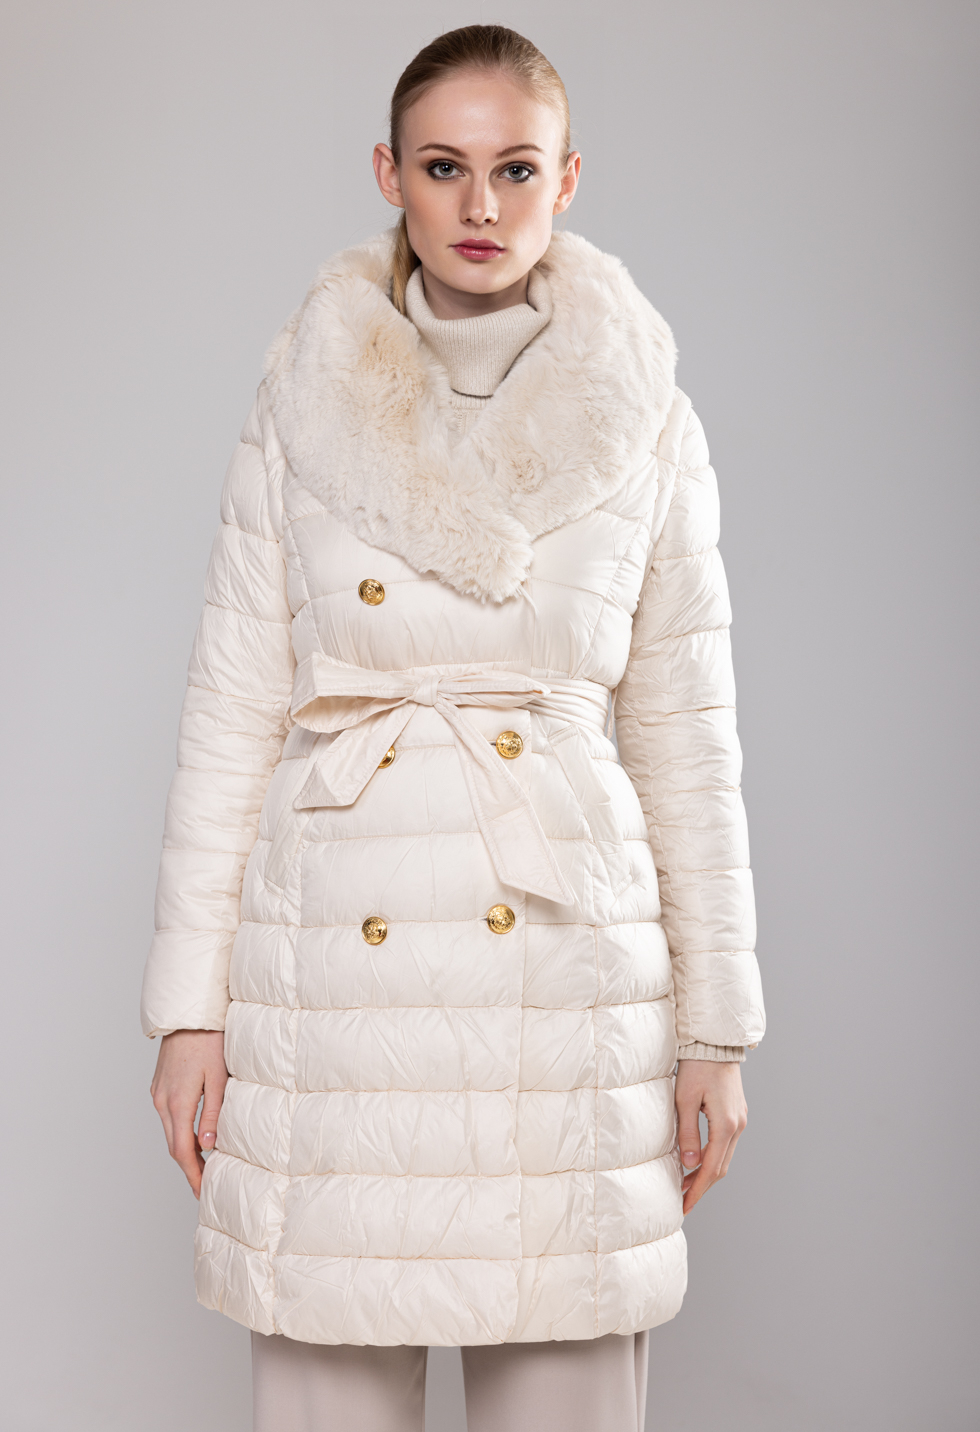 Jacket with fur collar and gold buttons